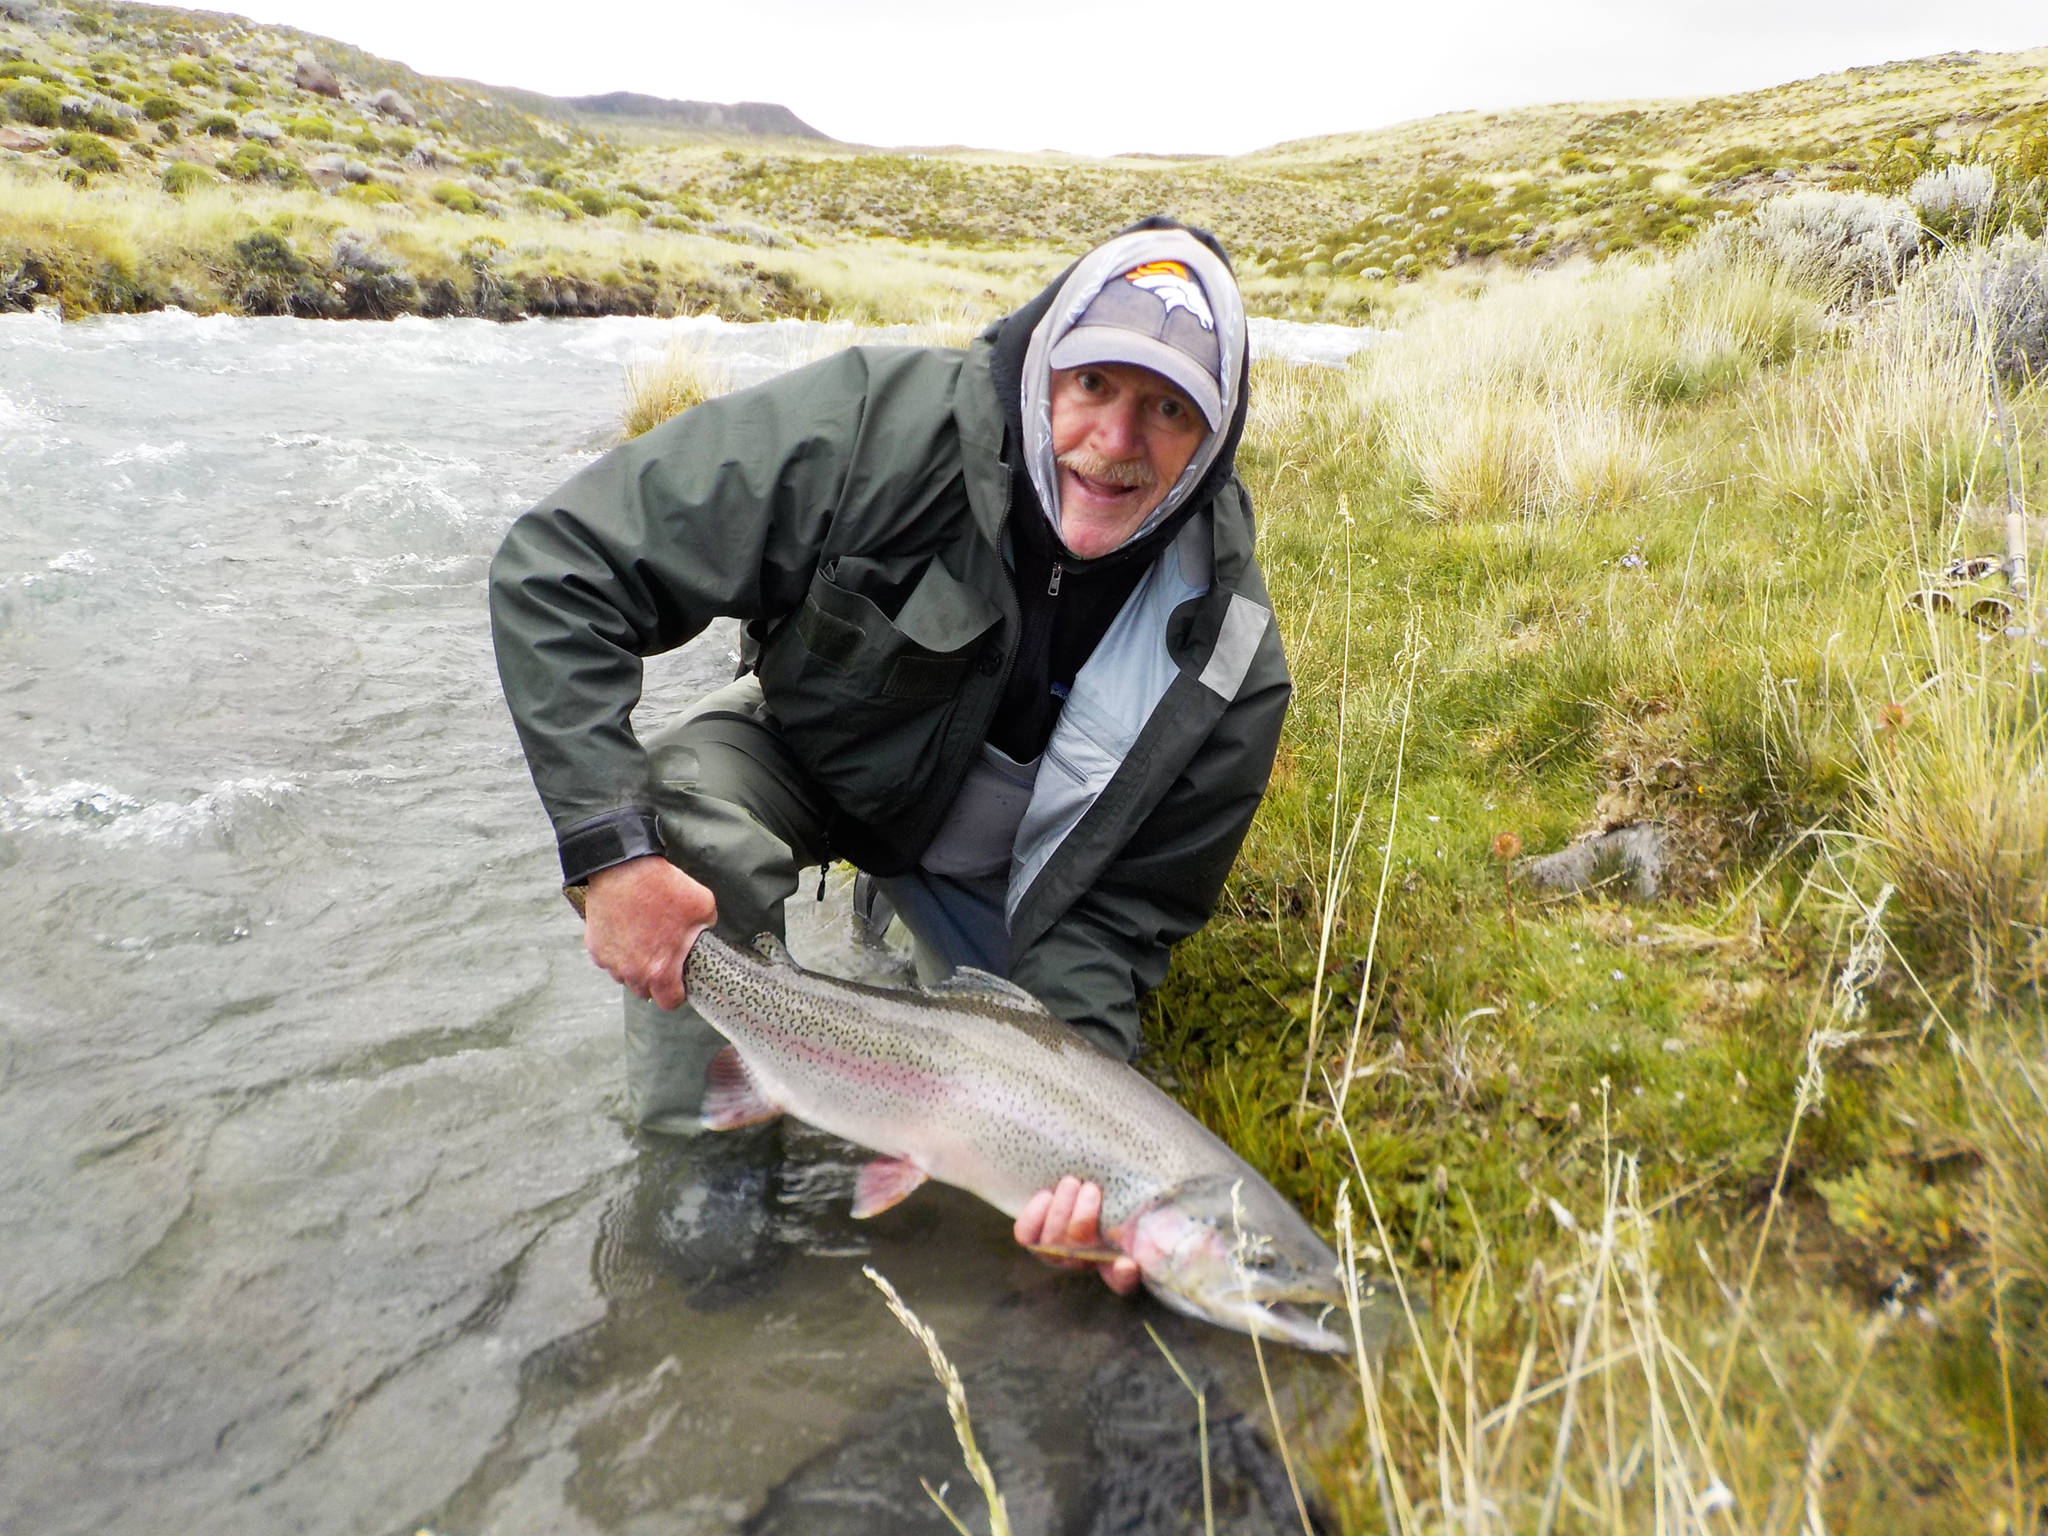 Soldotna resident Bruce King, a former fisheries biologist for the Alaska Department of Fish and Game, holds a rainbow trout he caught during a trip to Patagonia, Argentina in 2016. The areas he fished boasted trout upwards of 30 inches. (Photo courtesy Bruce King)